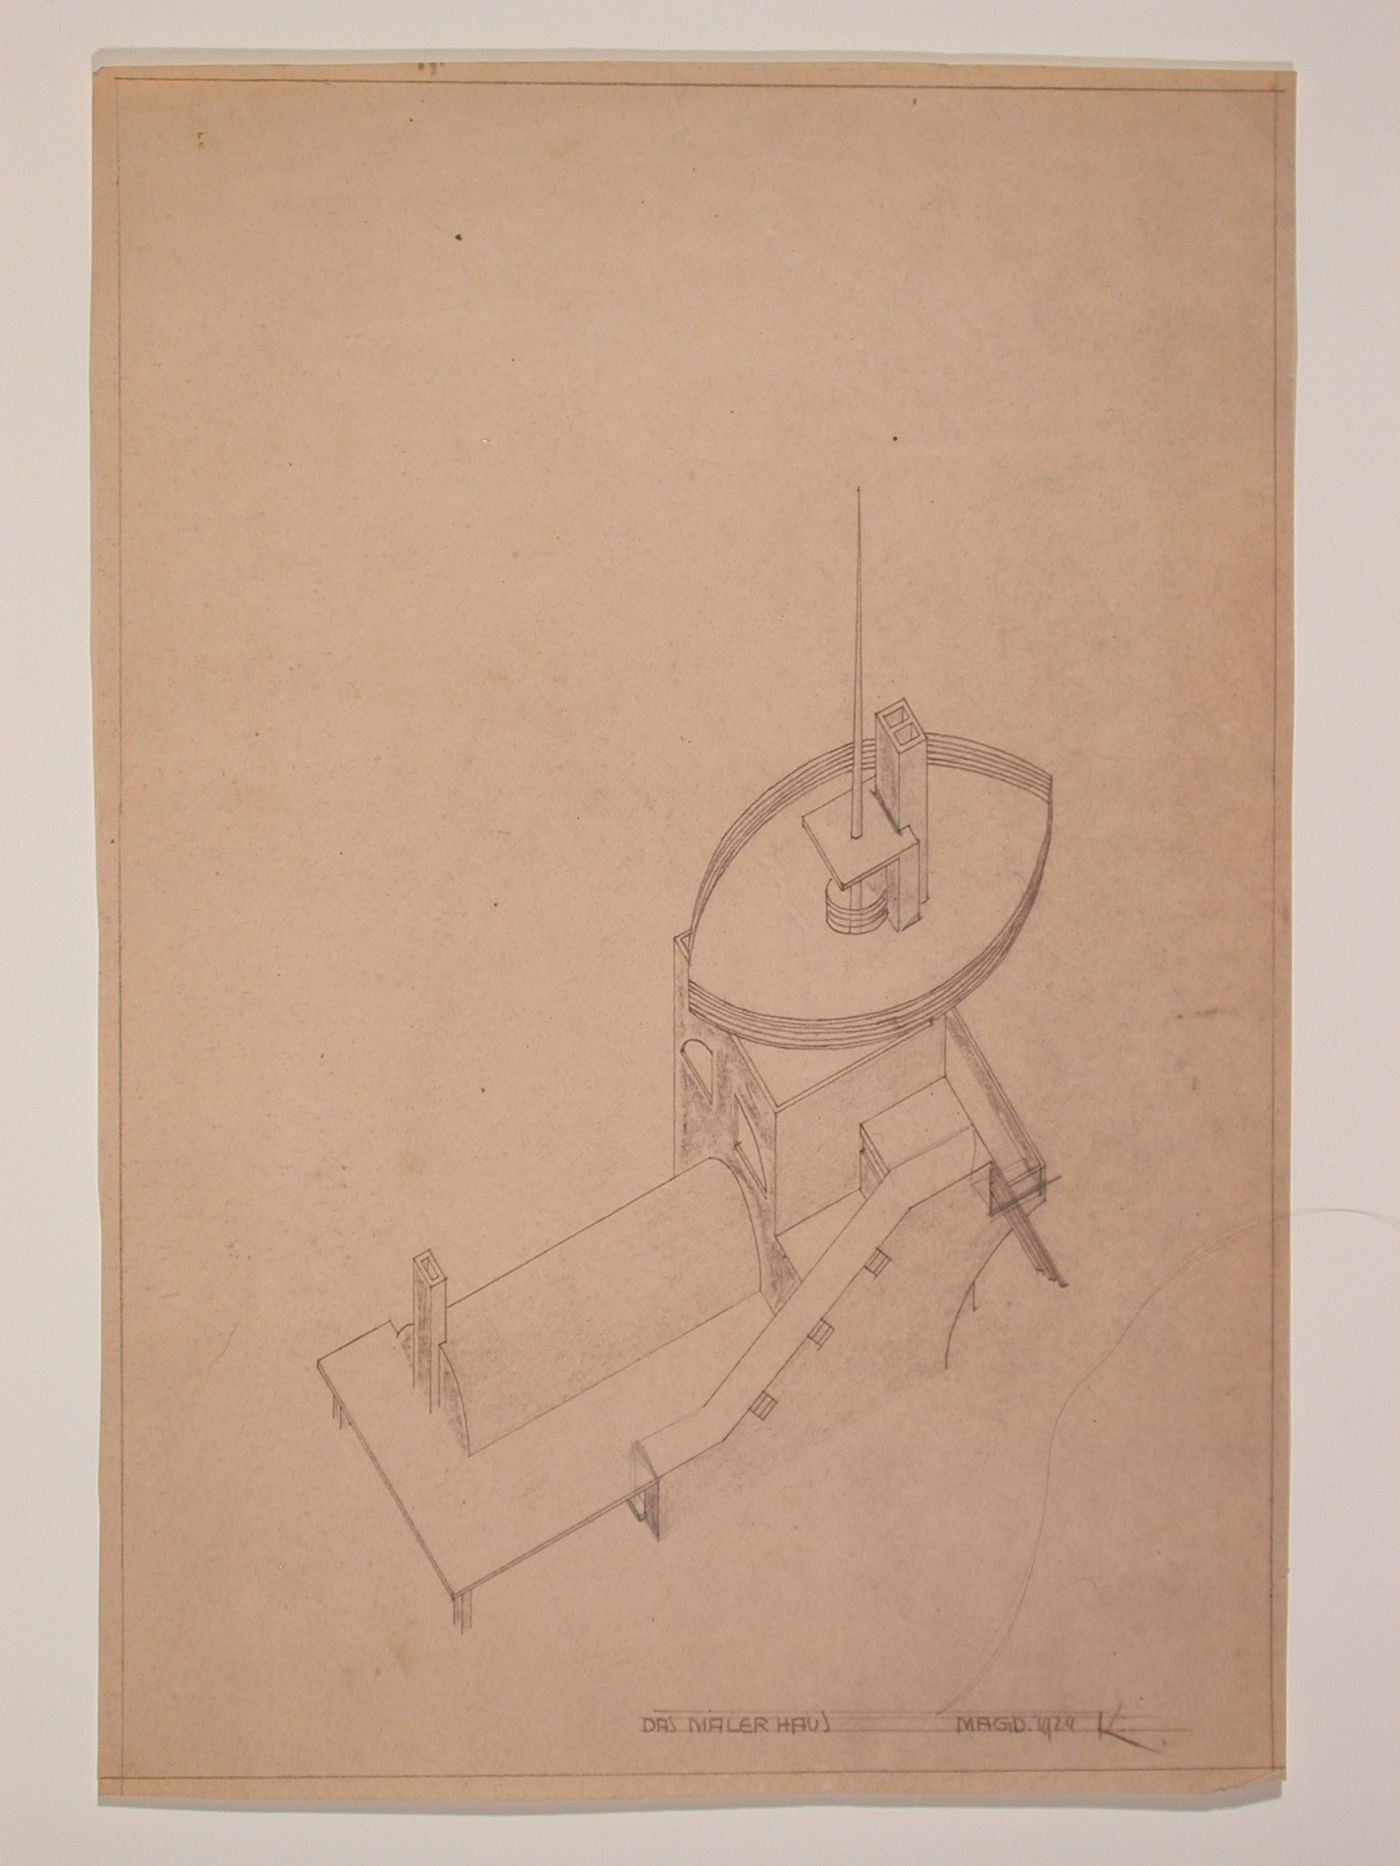 Elevation for the "Das Maler Haus" by Carl Krayl